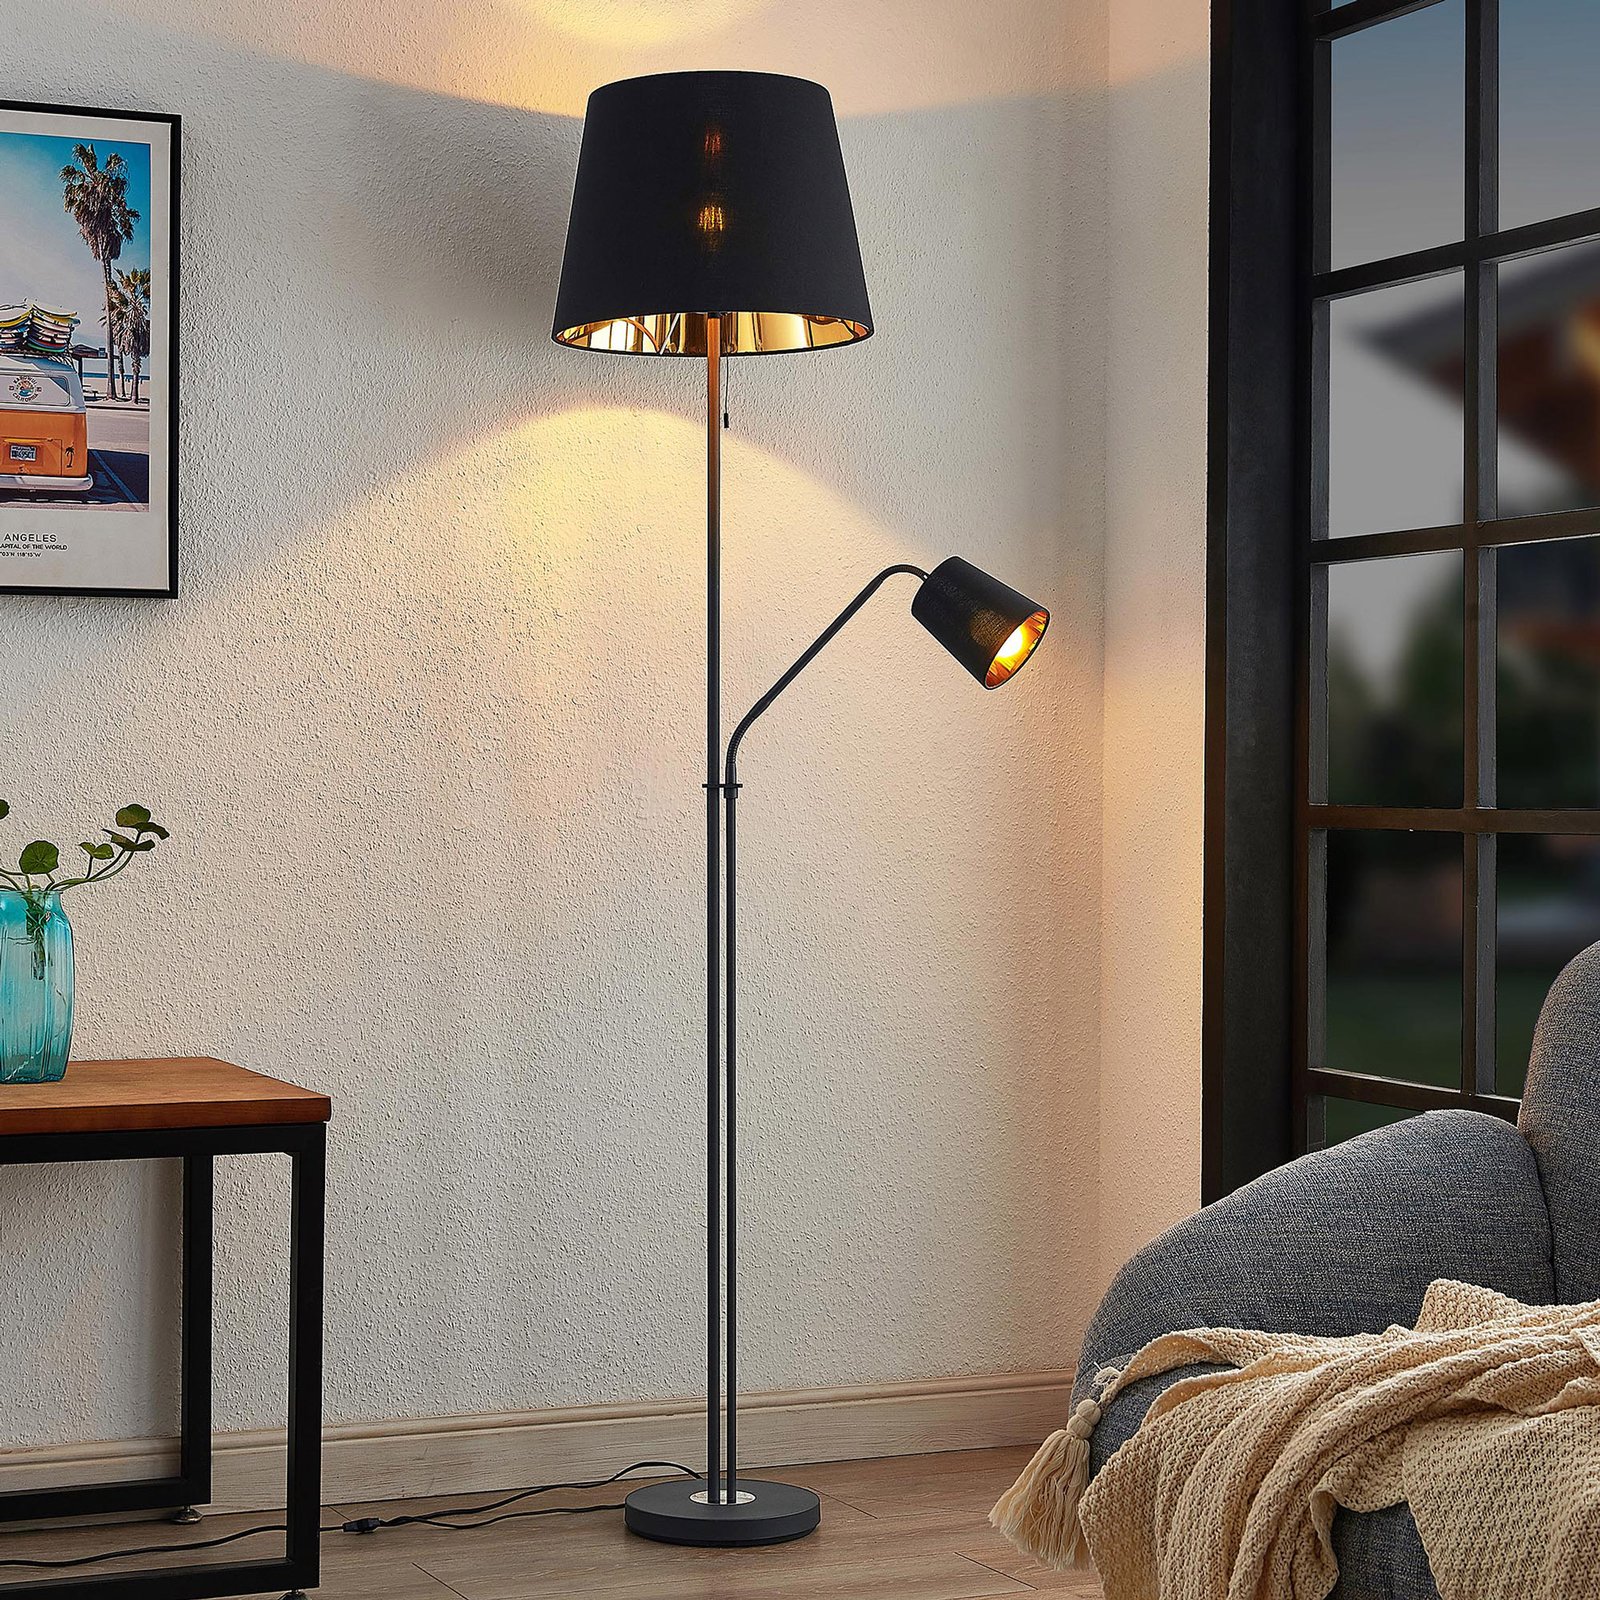 Lindby Efalia floor lamp with a reading light